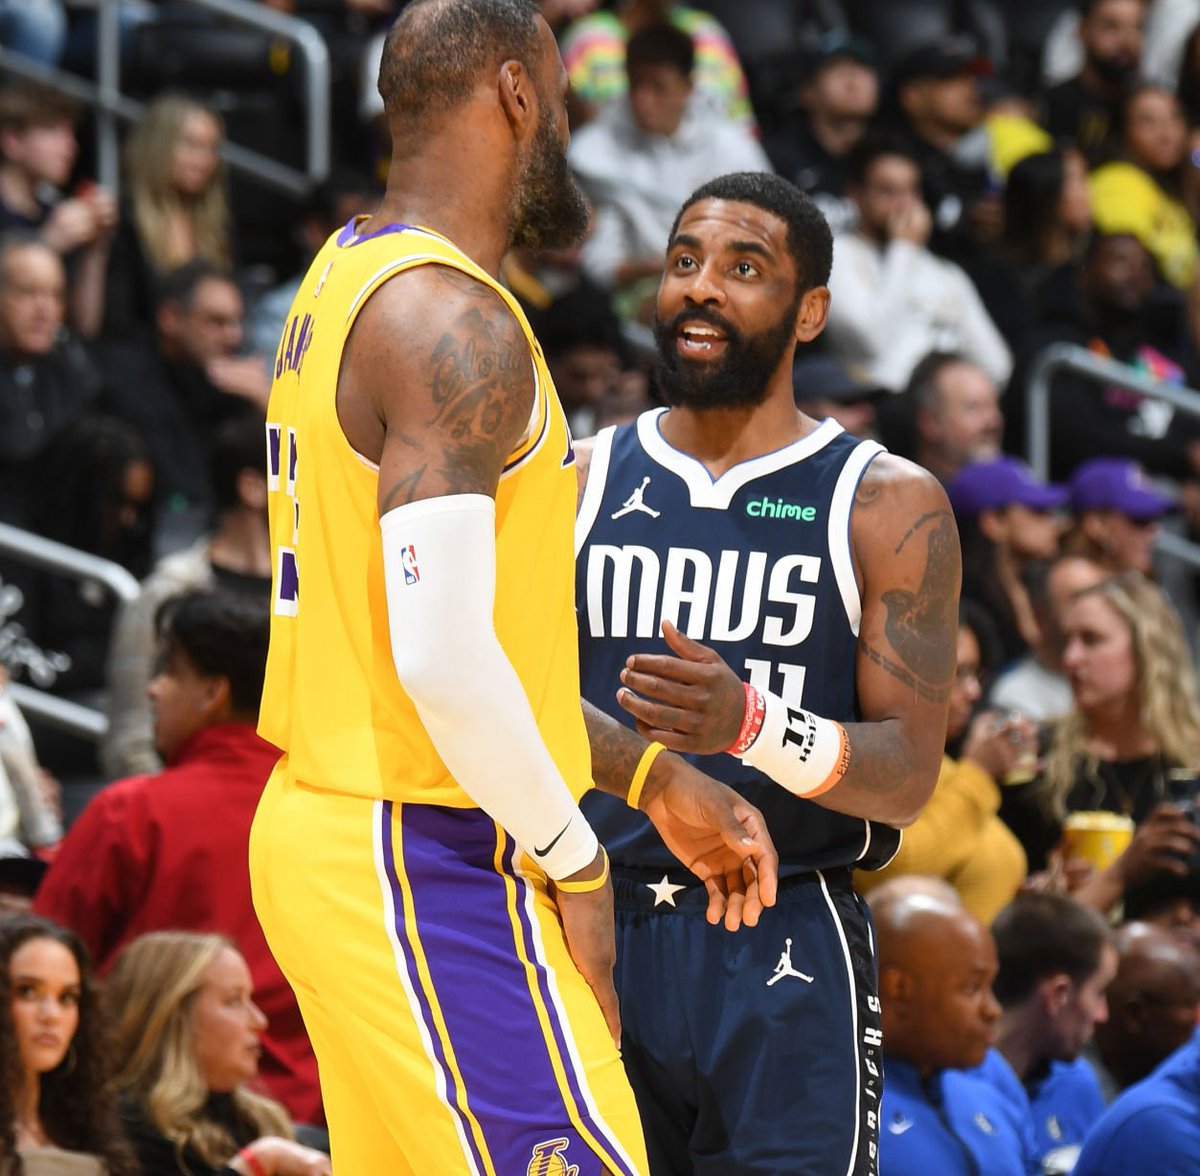 Kyrie Irving says he definitely considered reuniting with LeBron James last season, but he suggests asking the GMs why it didn’t work out

“Everything was considered. He's a great friend of mine, a great brother of mine. We obviously played together [in Cleveland]. Everybody…